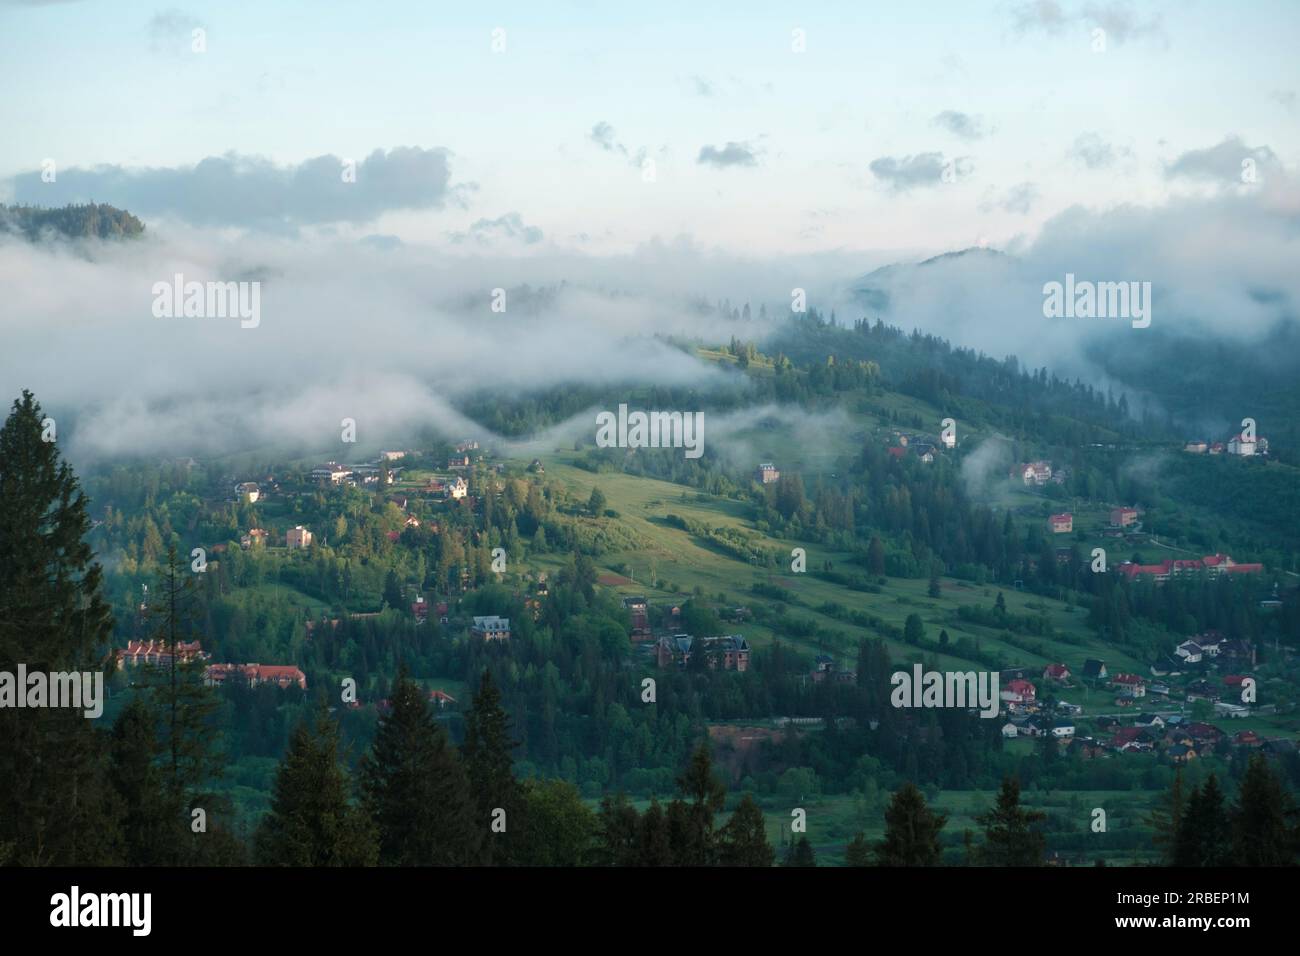 mountainous rural landscape at sunset. beautiful scenery with forests, hills and meadows in evening light. ridge with high peak in the distance Stock Photo